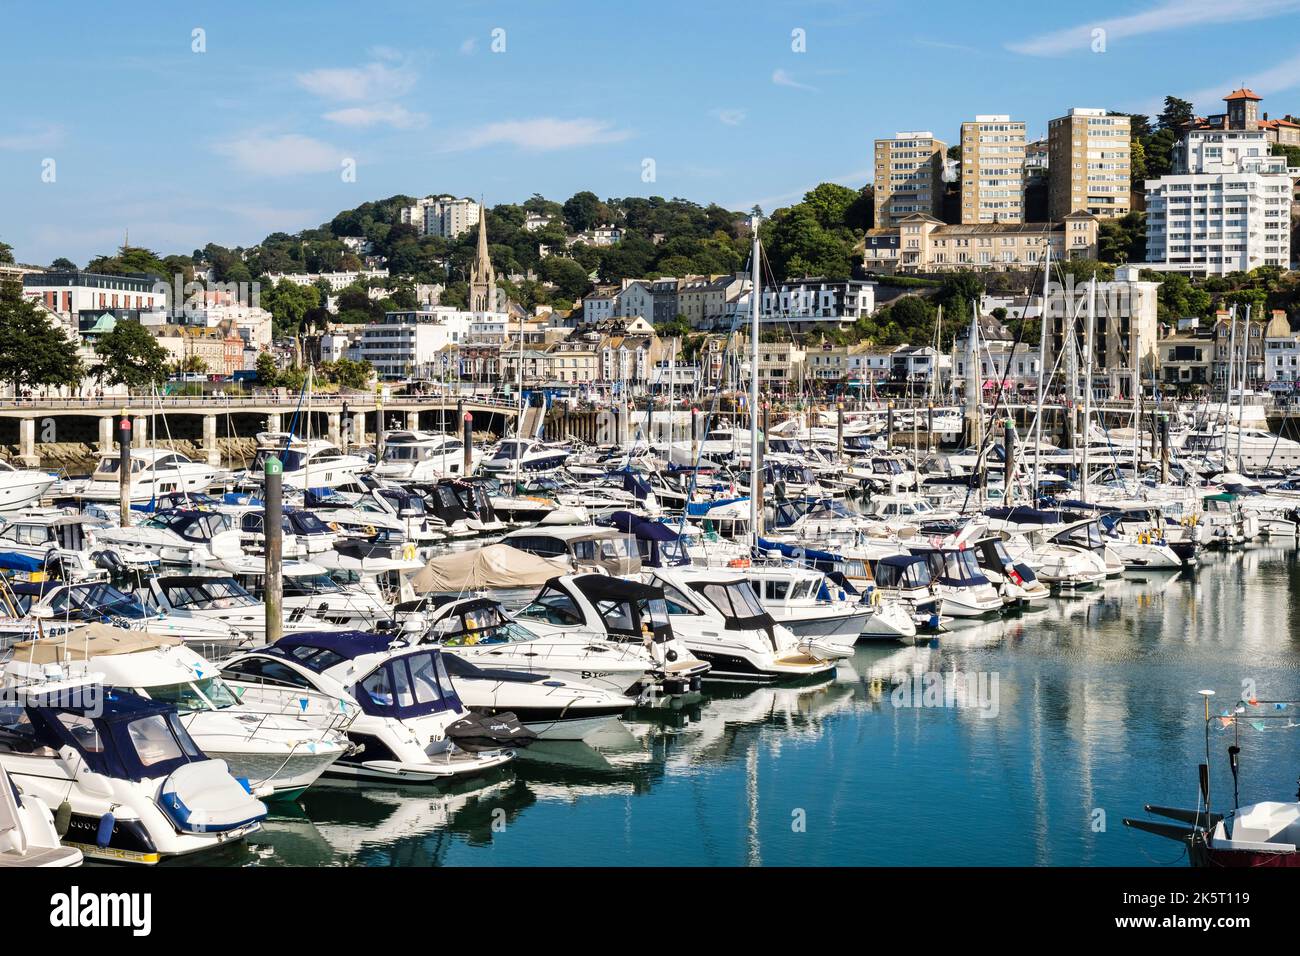 Boats moored in marina seen from Princess Pier, Torquay, Devon, England, UK, Britain,. Known as the English Riviera Stock Photo